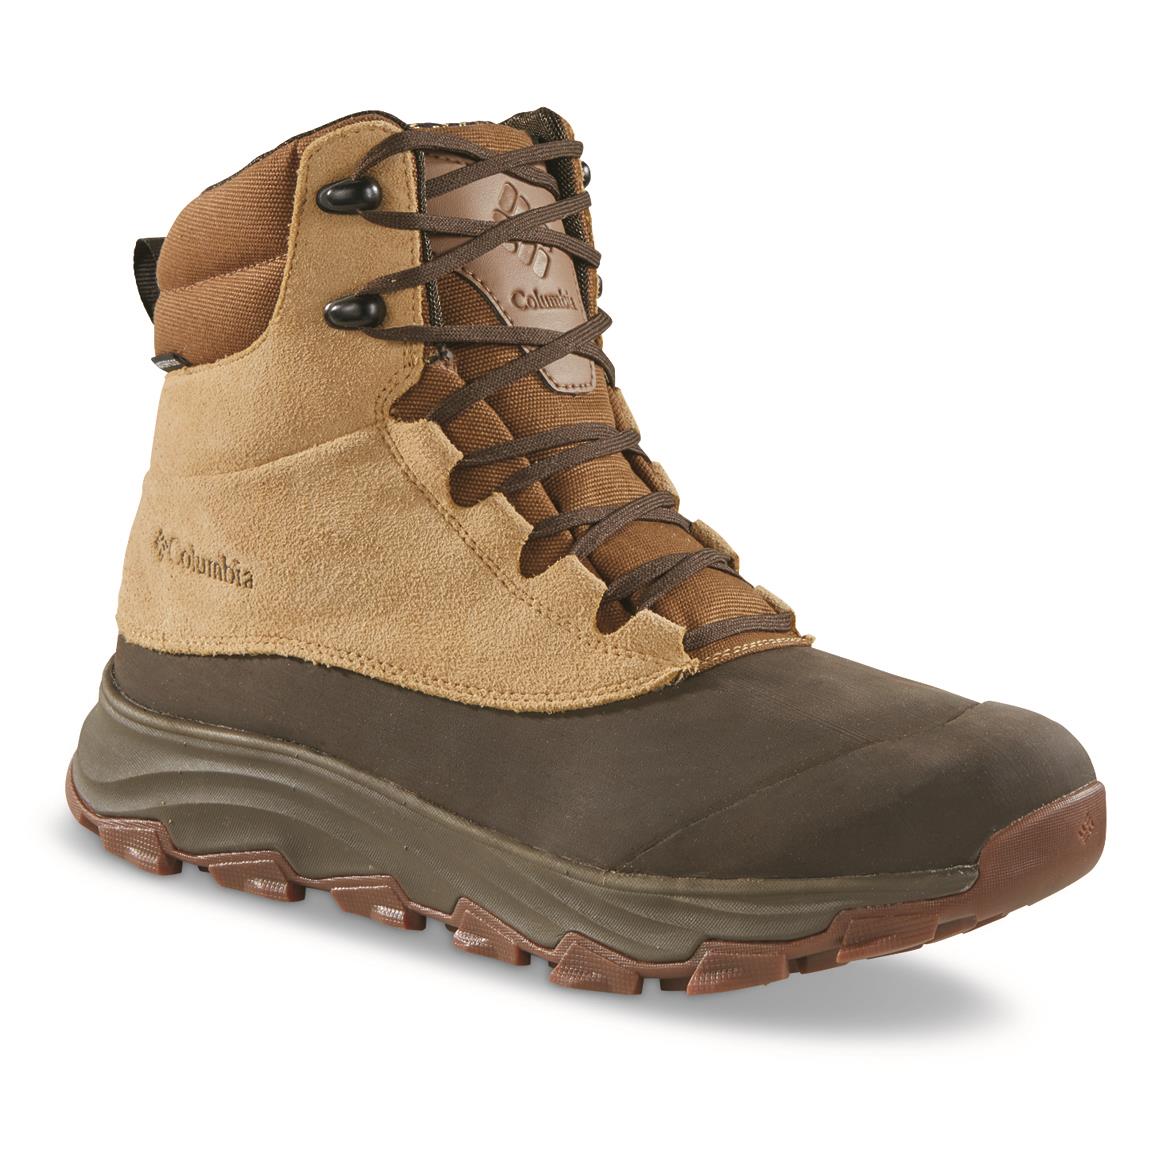 Columbia Expeditionist Shield Insulated Boots, 200 Gram, Curry/light Brown